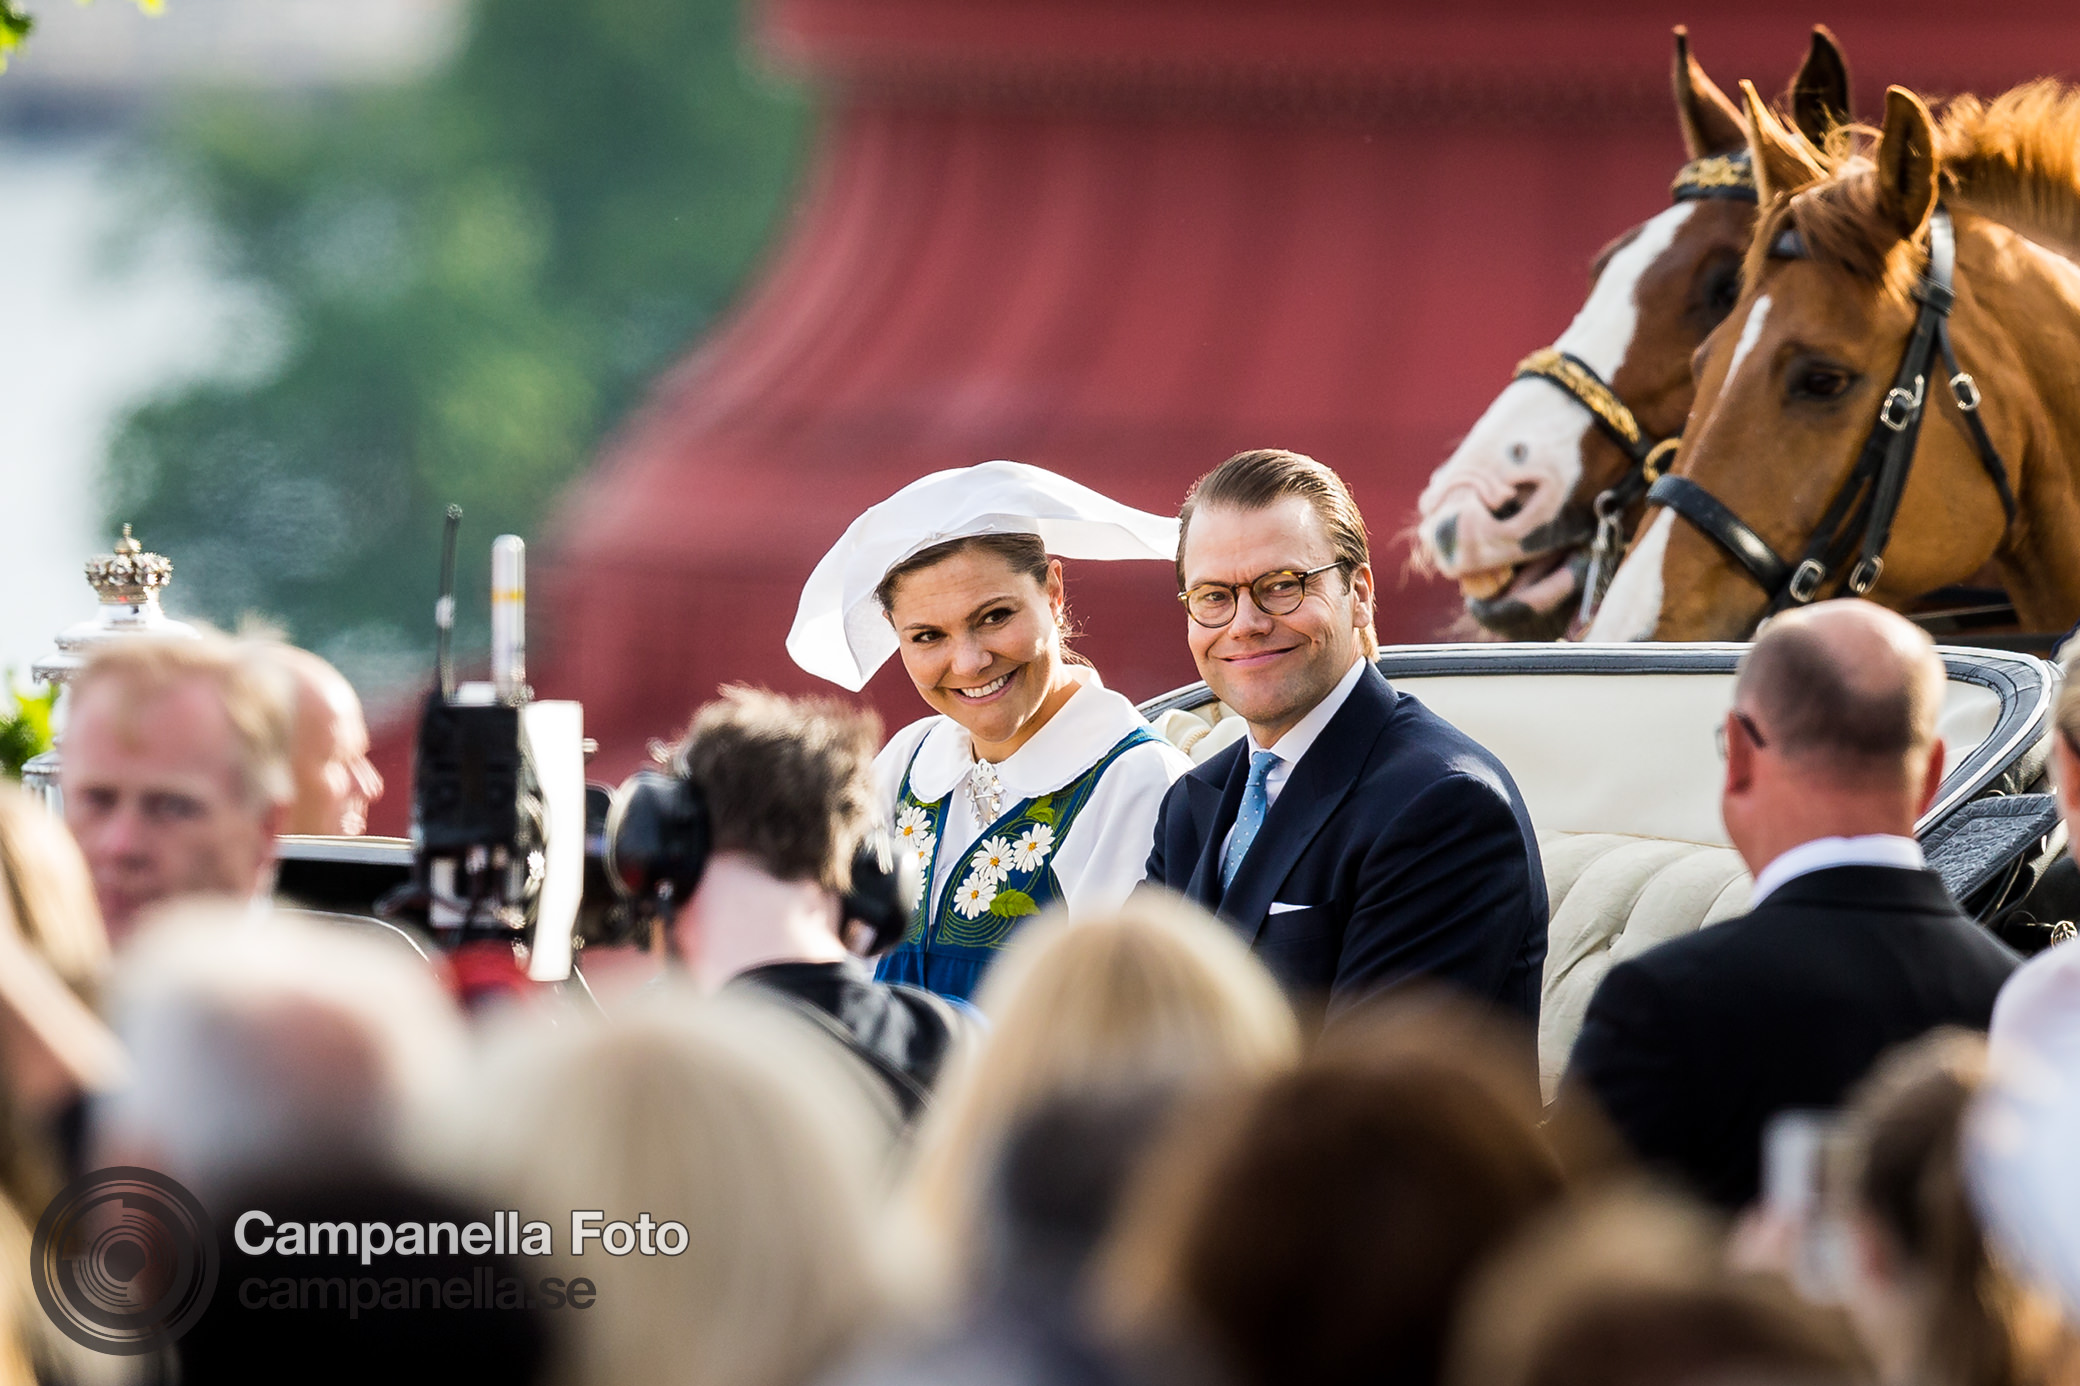 Sweden's National Day - Michael Campanella Photography